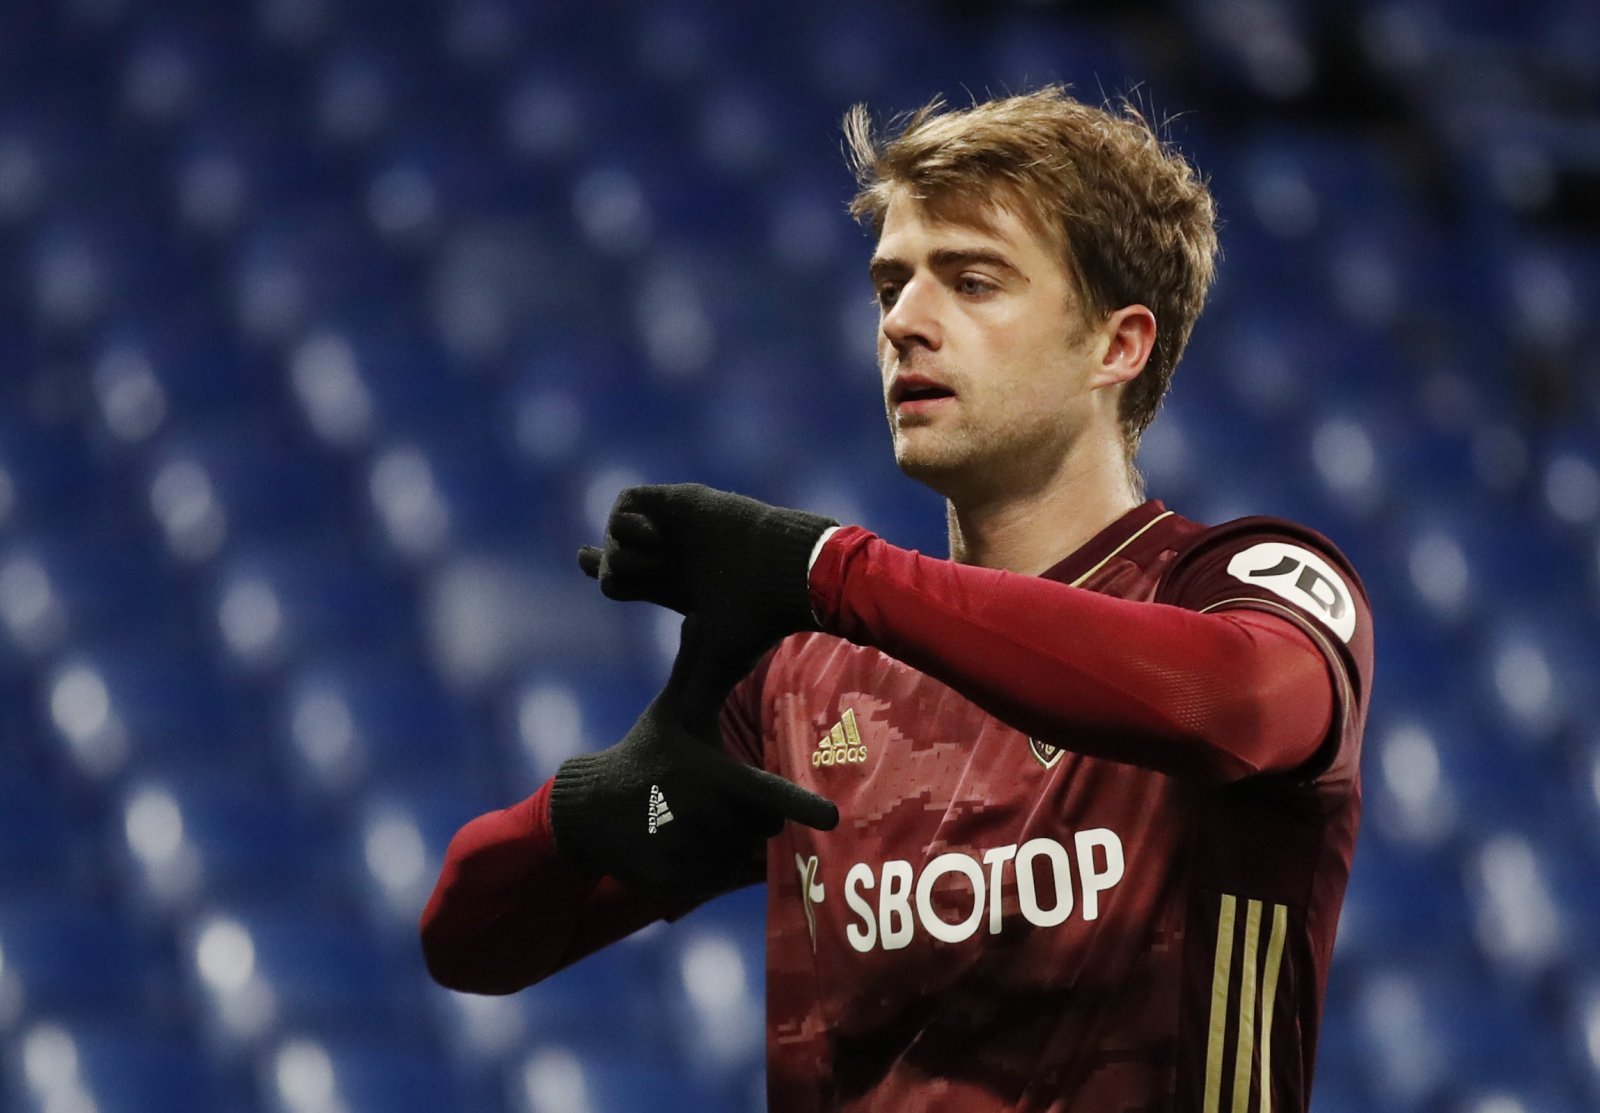 Liverpool ‘admire’ Leeds United star Patrick Bamford – but new deal could inflate fees